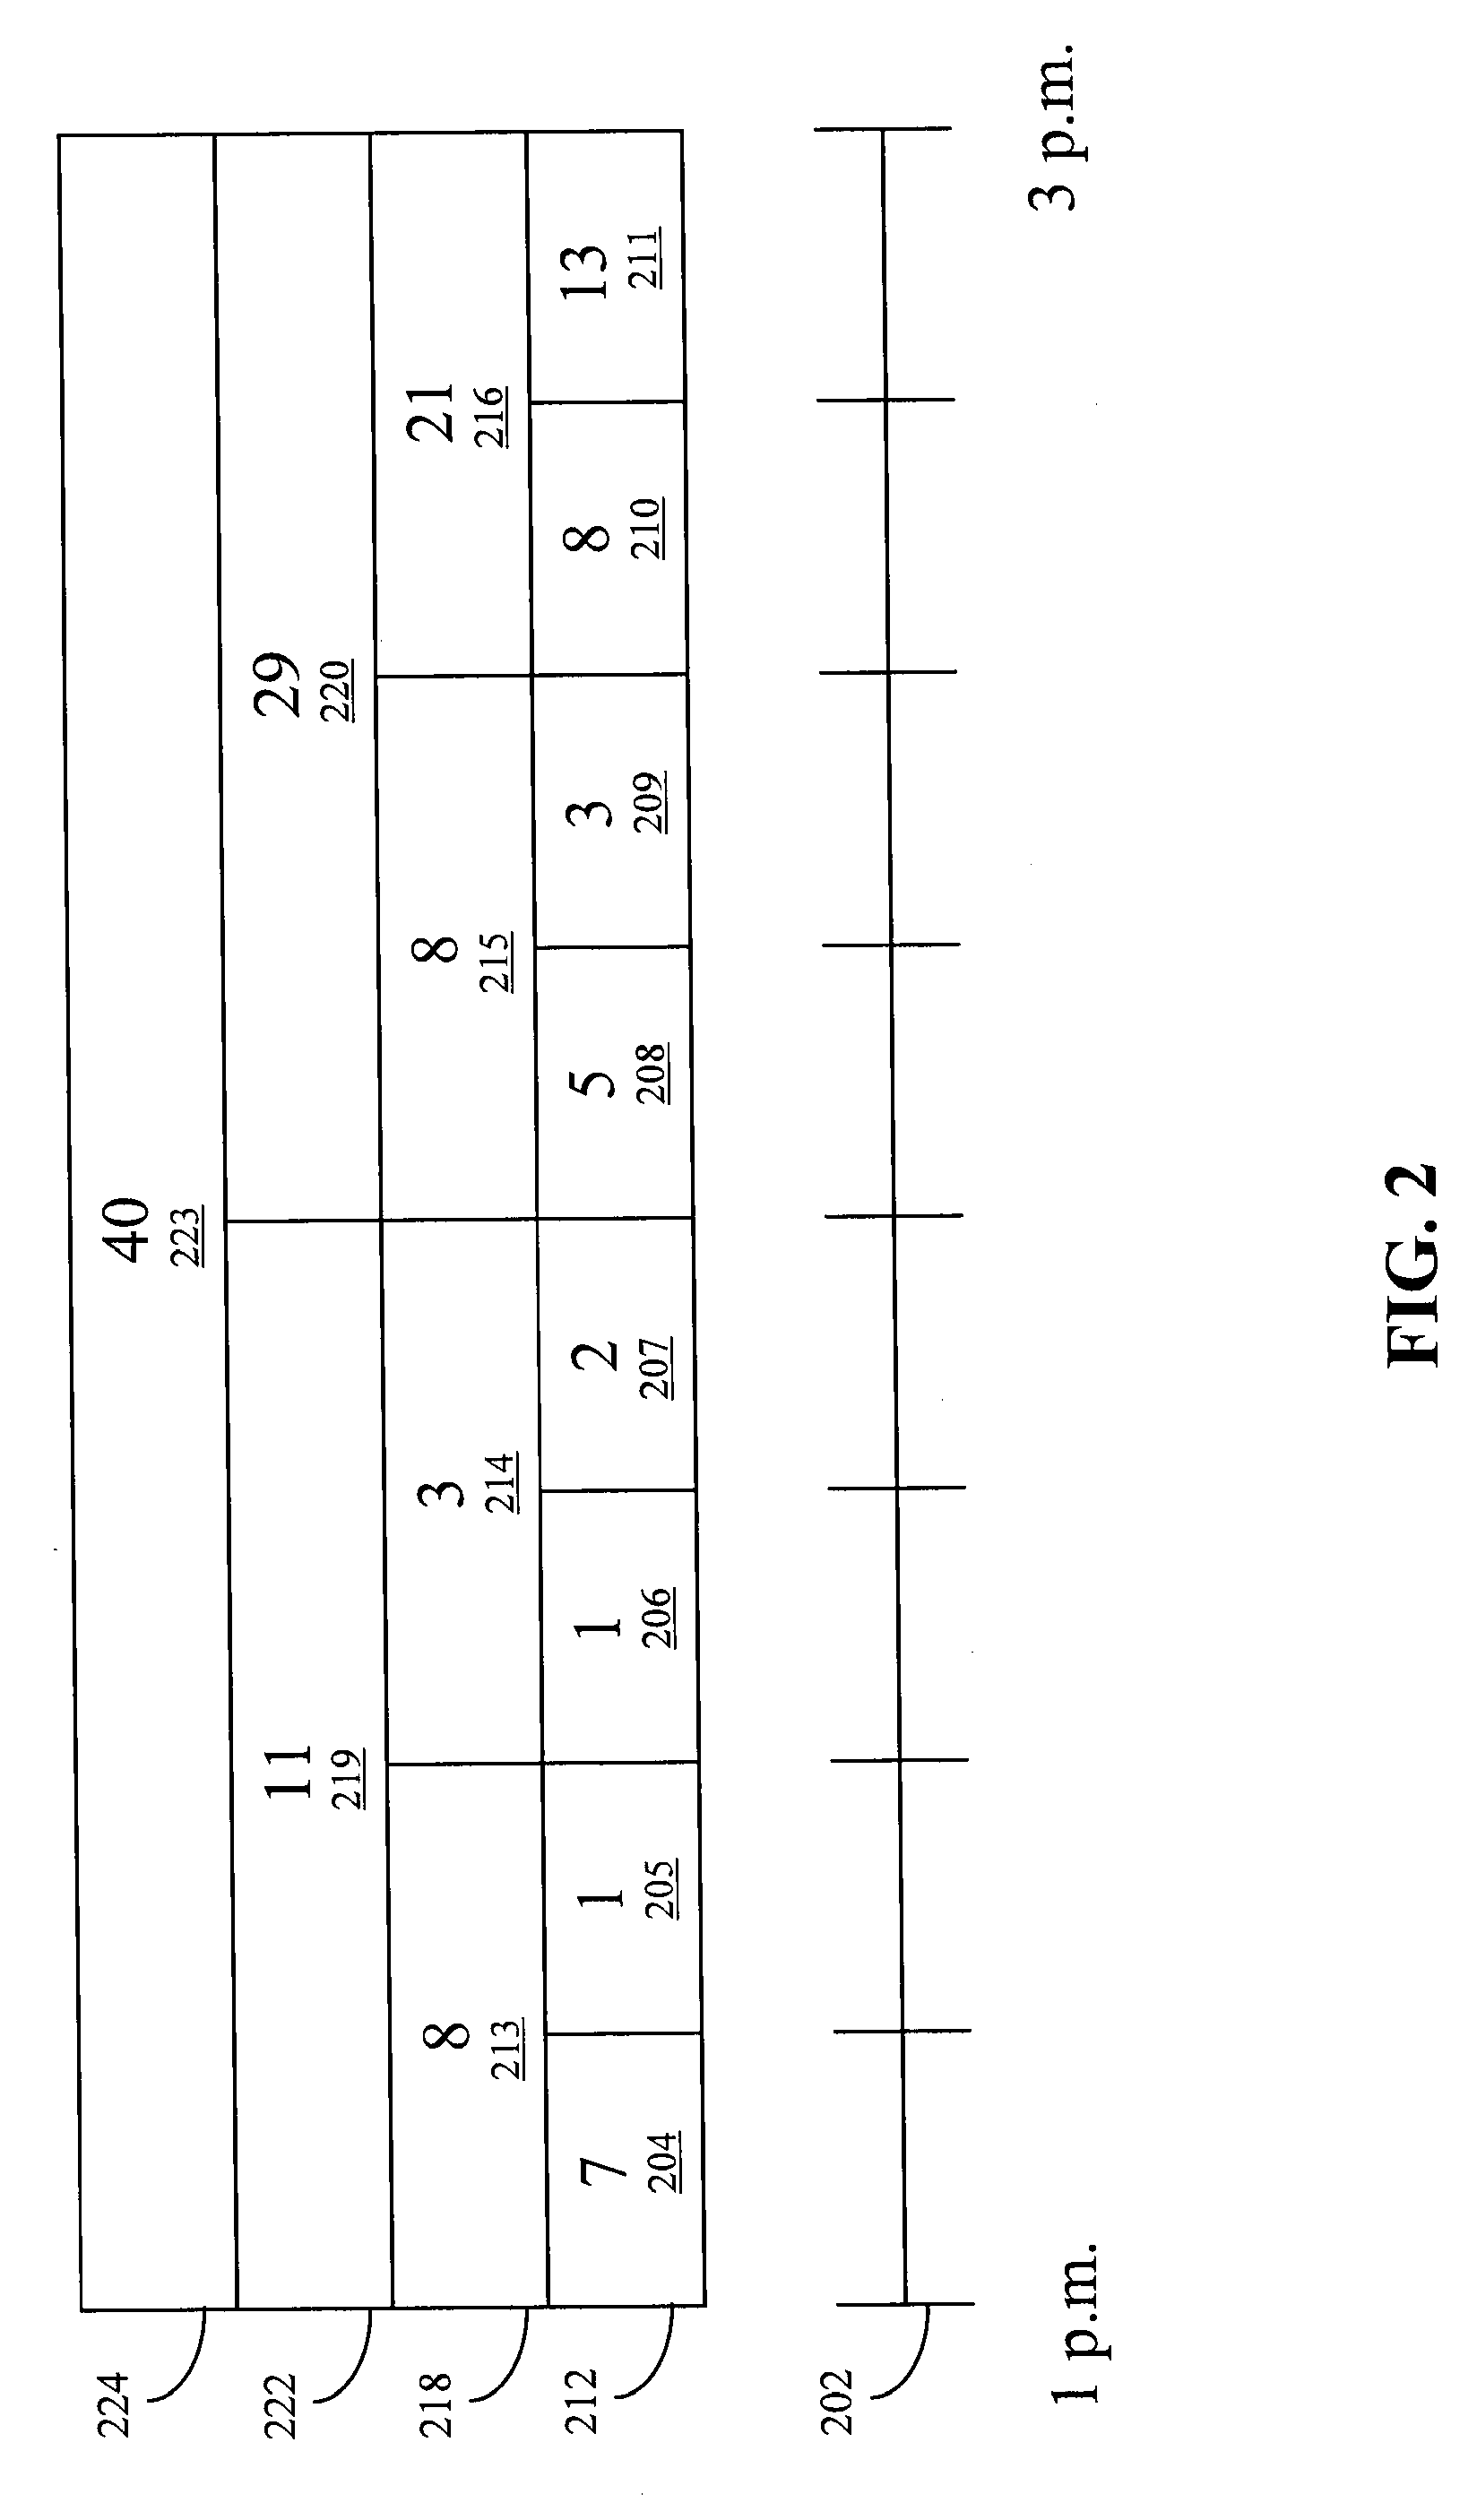 Efficient storage of data allowing for multiple level granularity retrieval